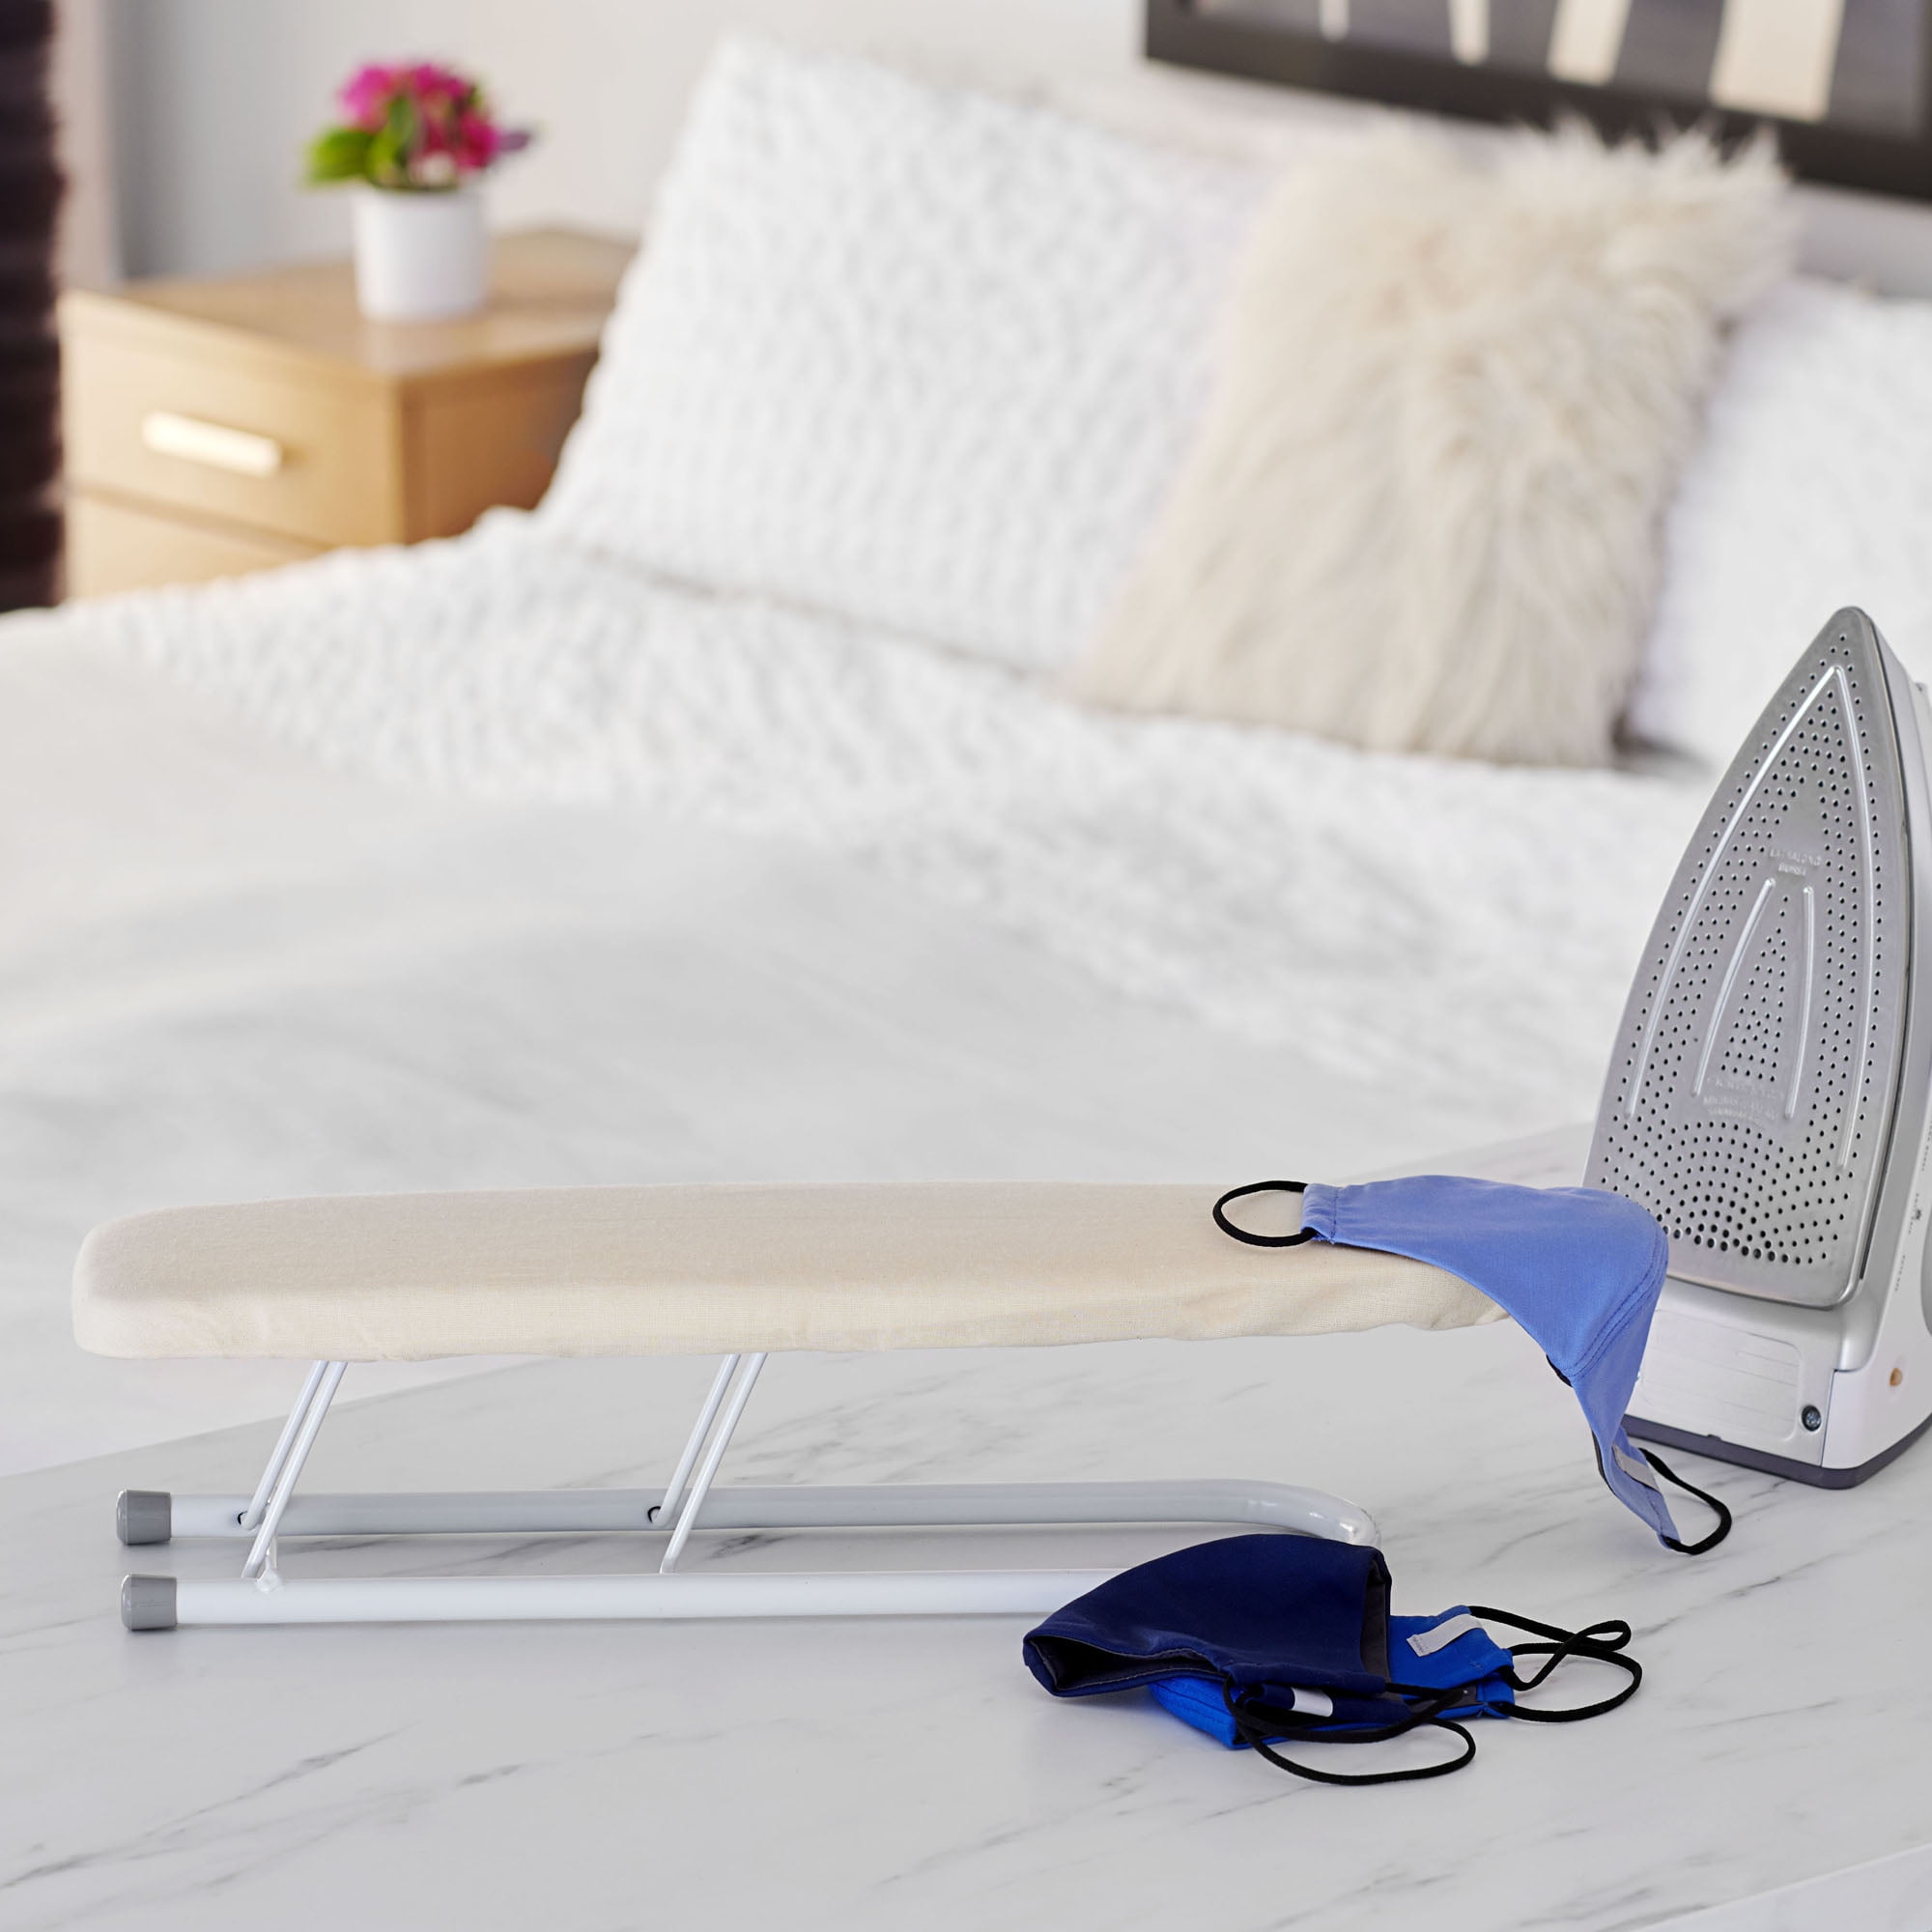 Standard Ironing Board Cover Gray - Room Essentials™